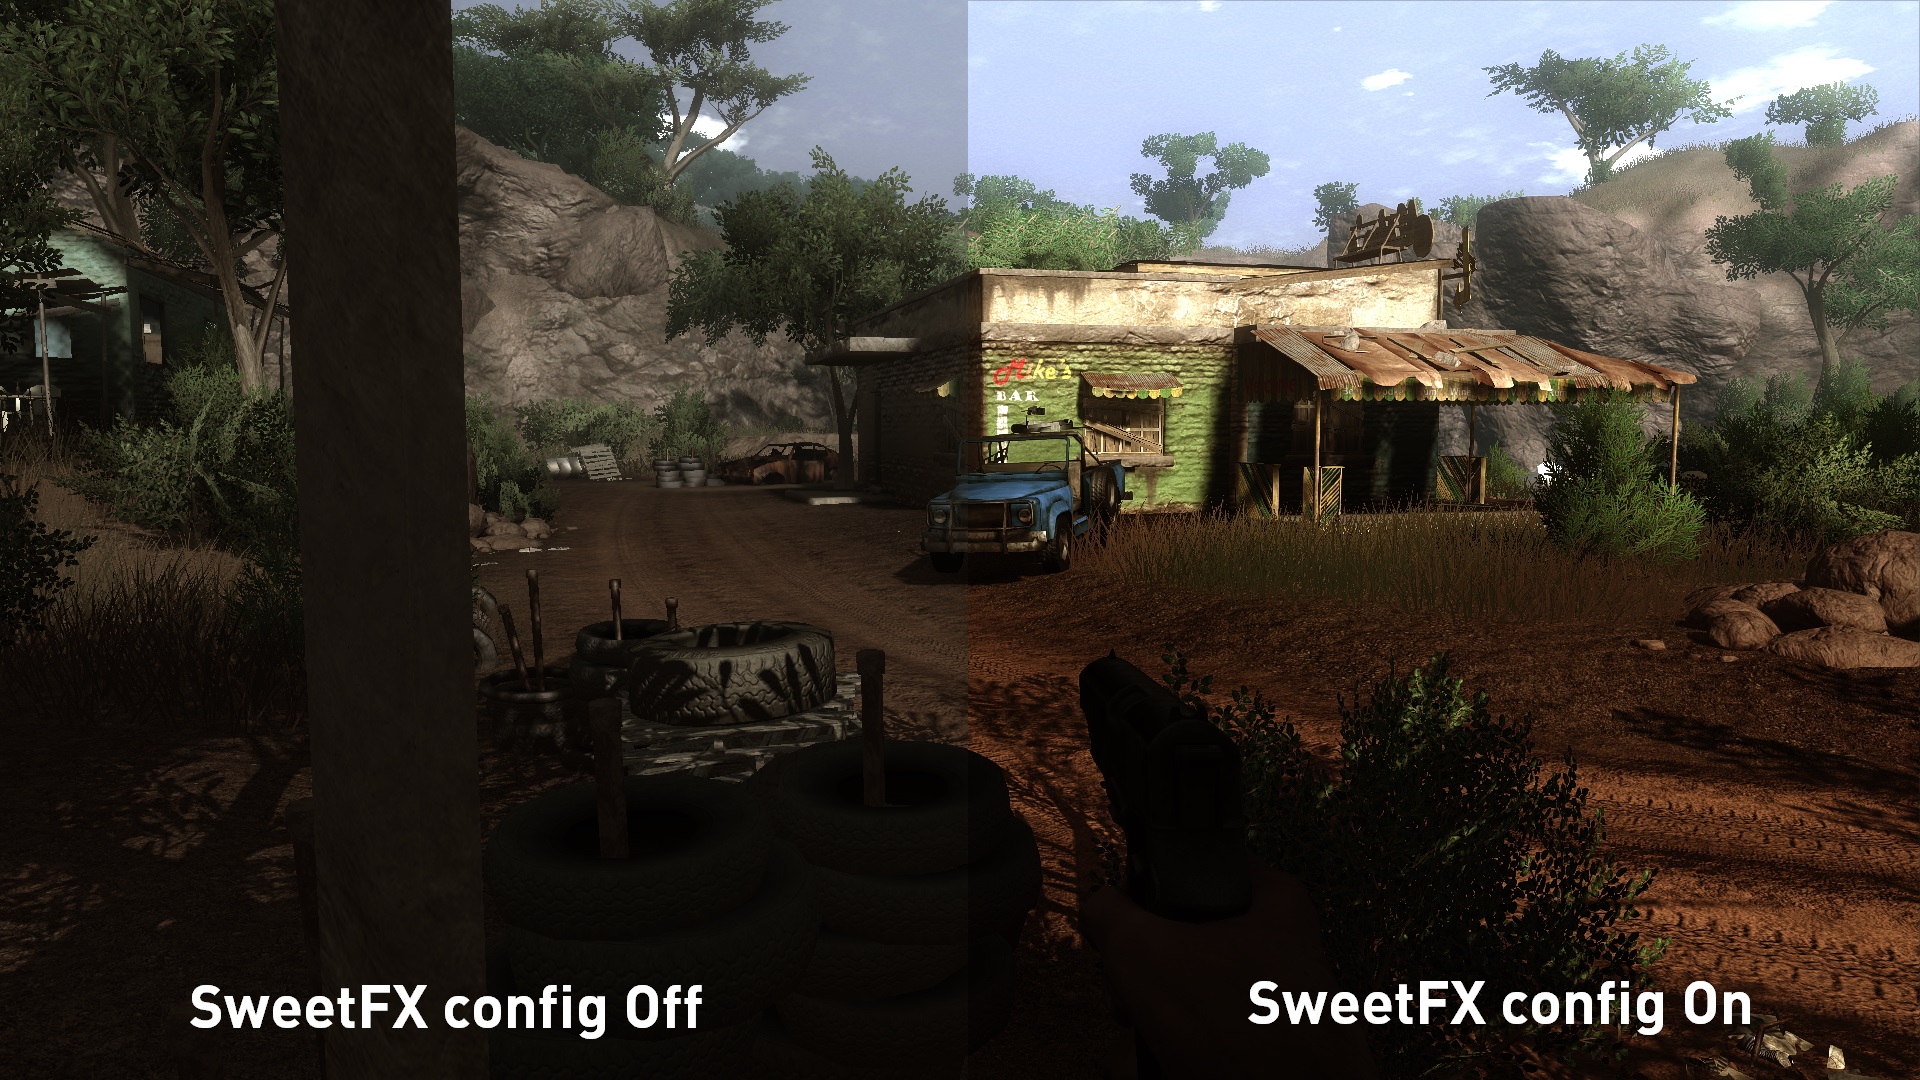 Far Cry 2: Fortune's DLC + Sweetfx Mod Gameplay W/ Live Commentary 